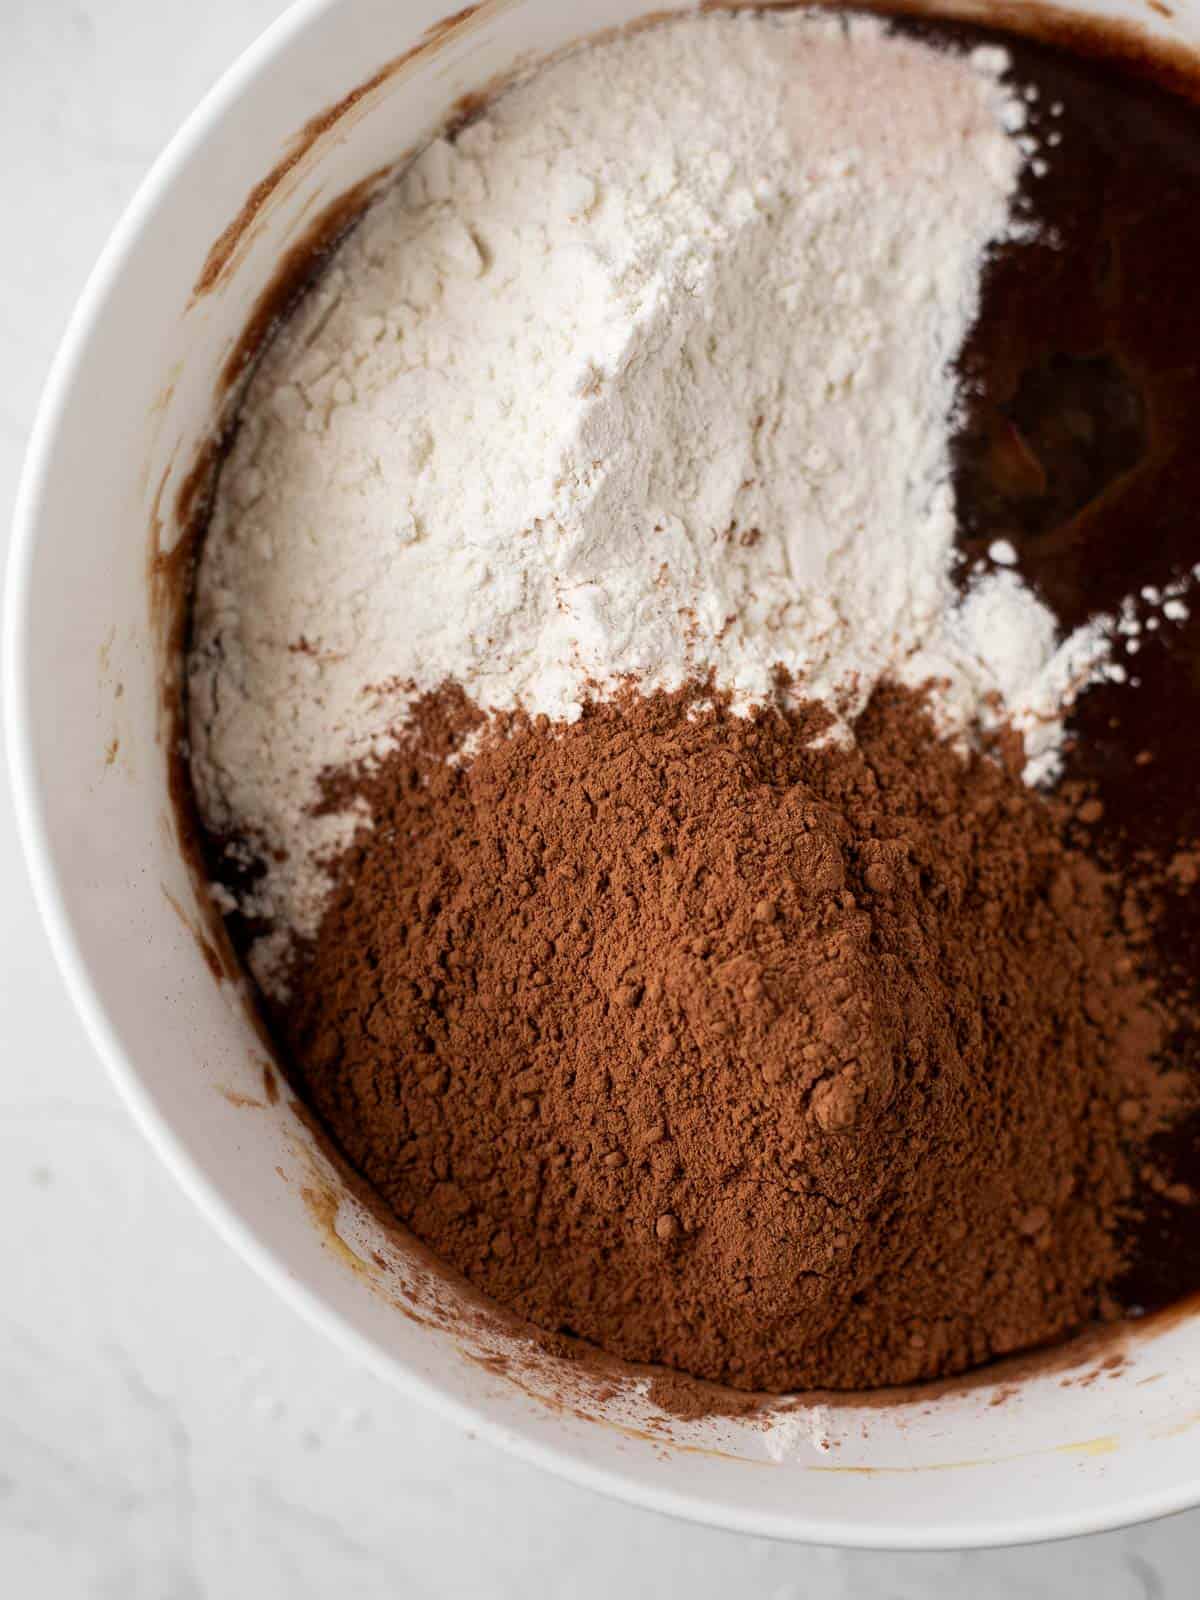 flour and cocoa powder in a bowl of brownie batter.